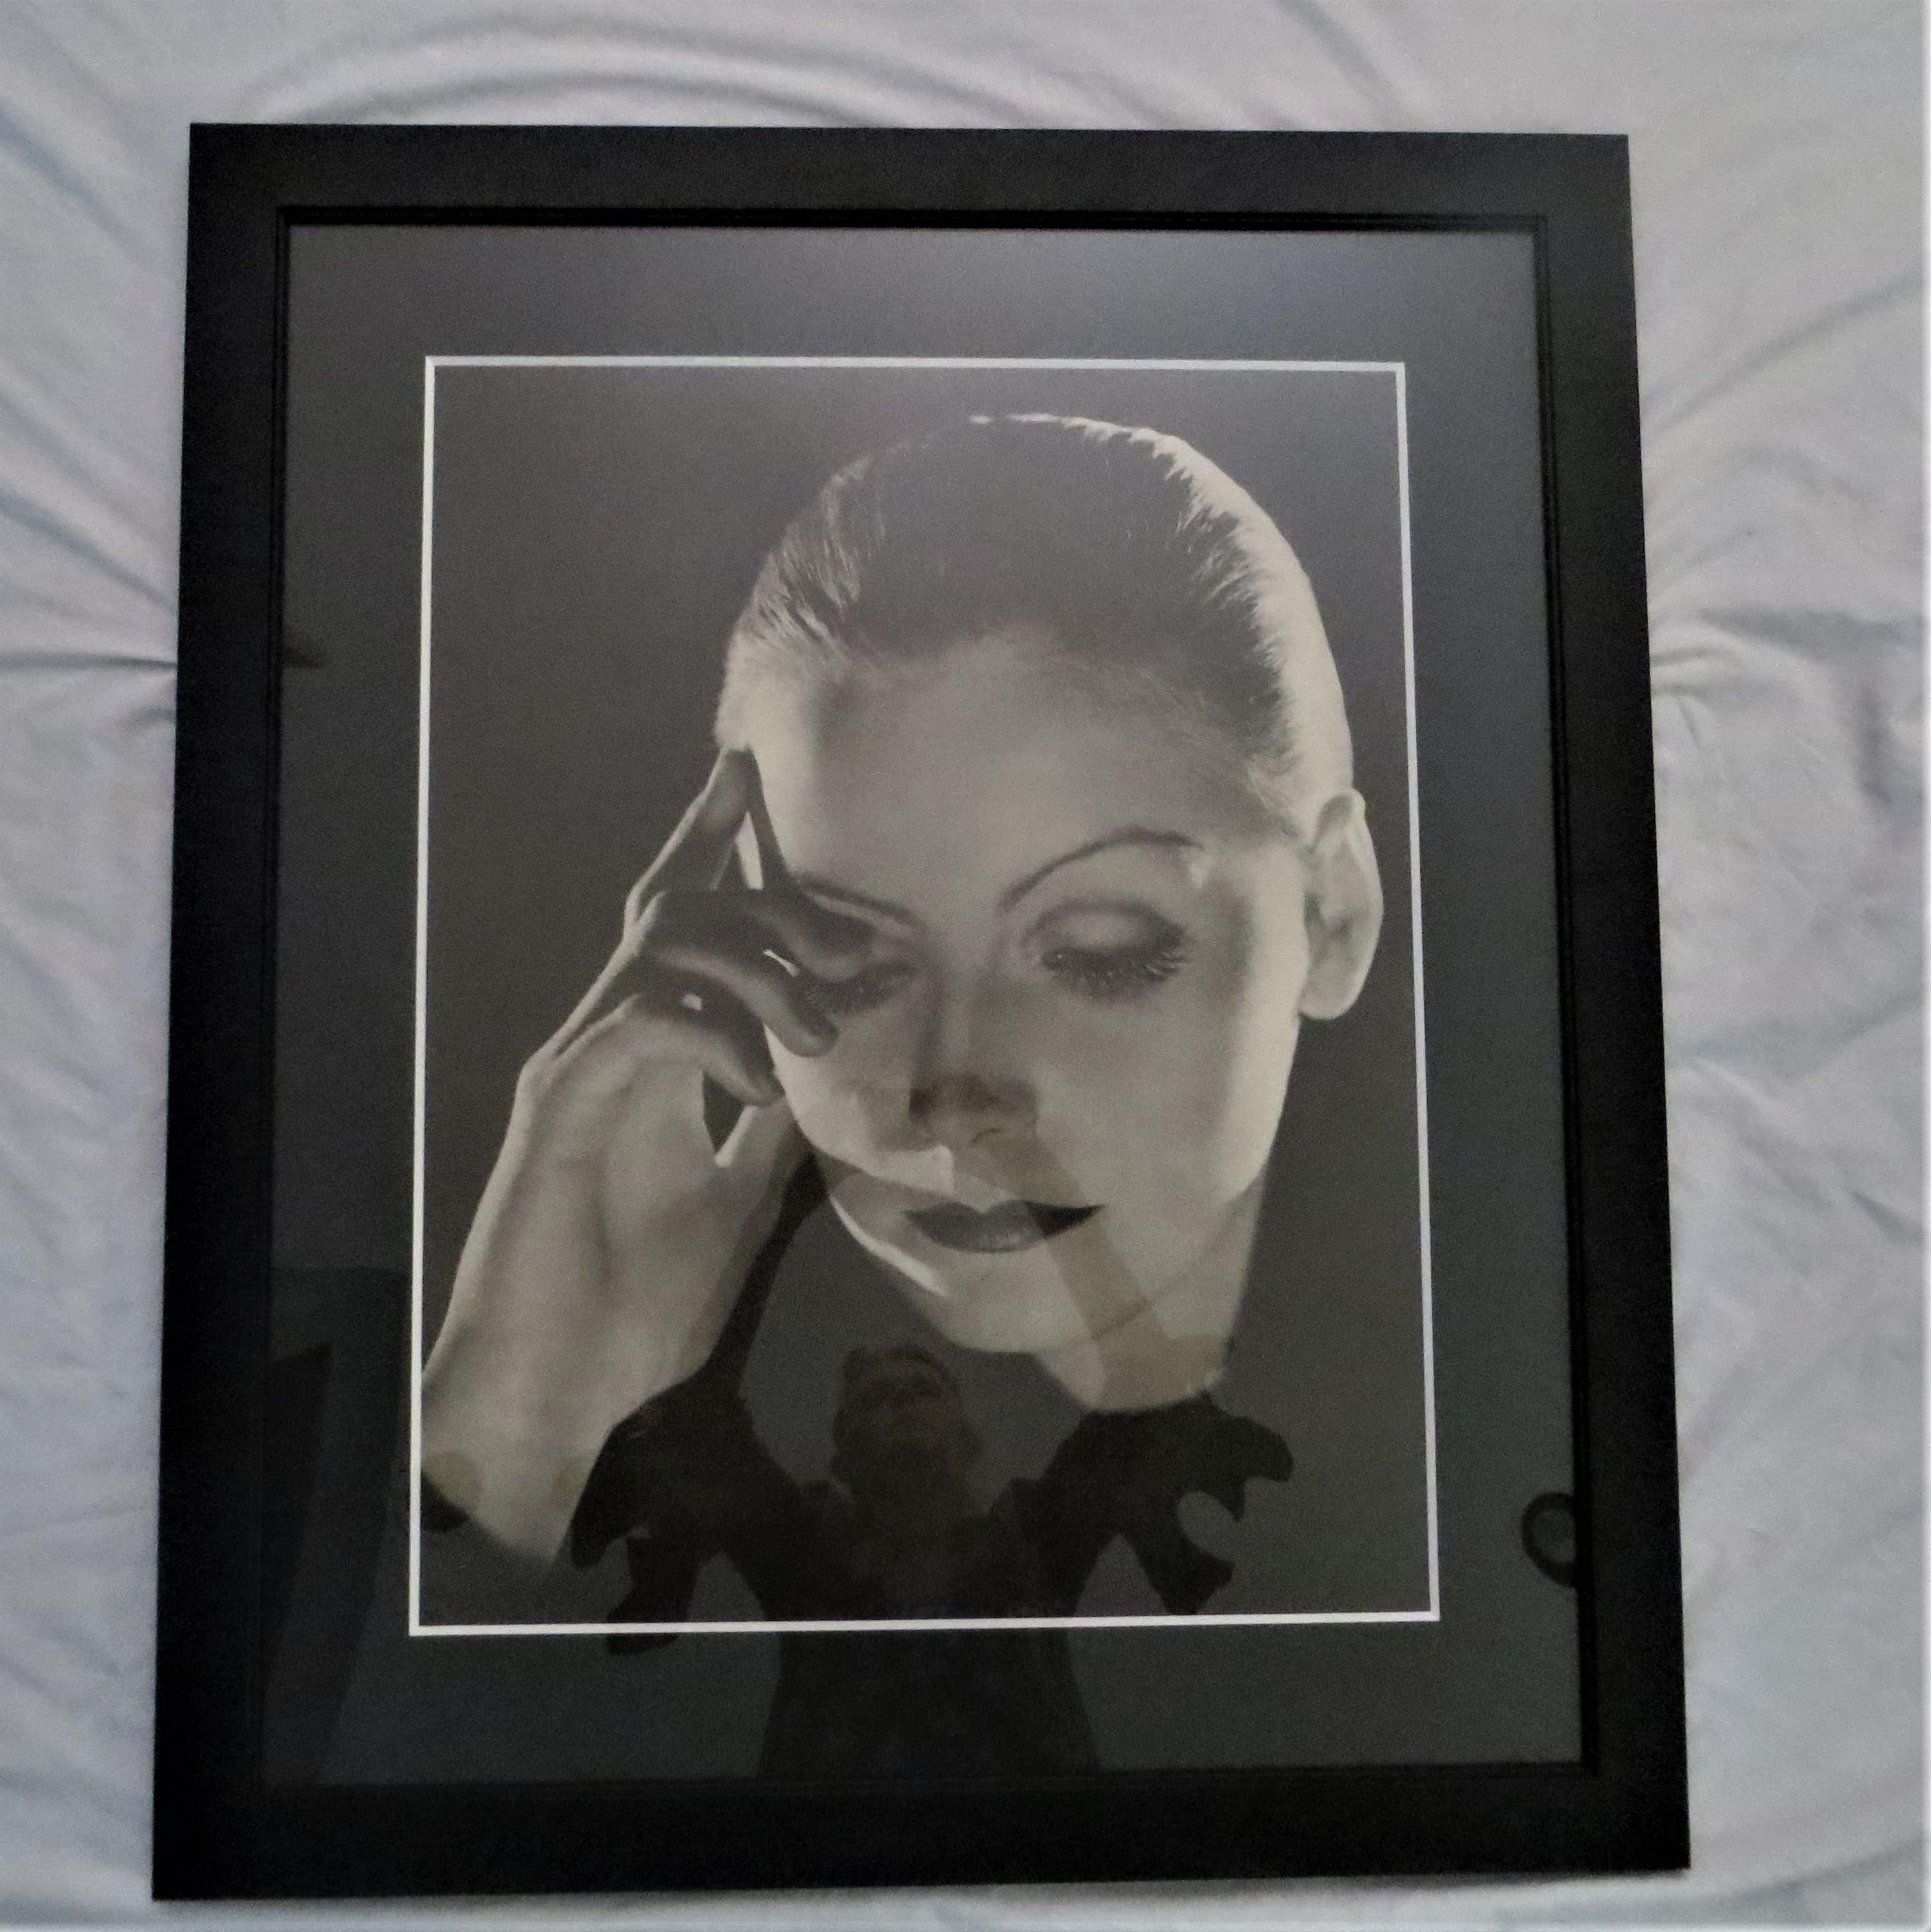 A pair of Photography after Greta Garbo Photo Portrait by Clarence Sinclair Bull. 
A beautiful  photo portrait of a pensive Garbo, shot by the legendary photographer. 
Bull was head of the MGM stills department for more than 40 years and he took